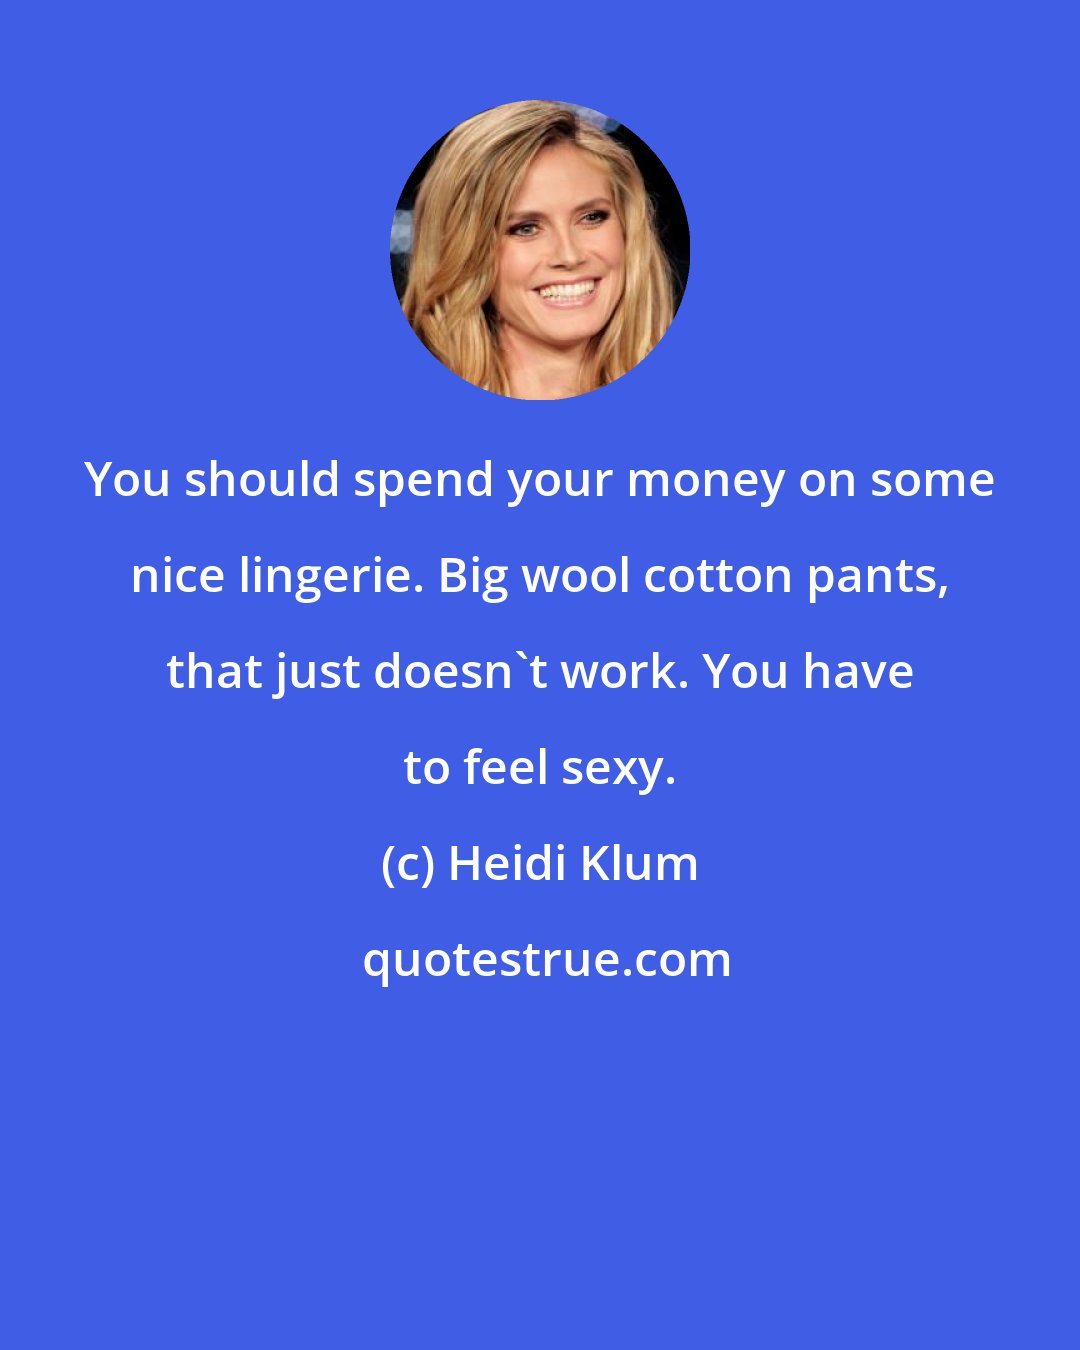 Heidi Klum: You should spend your money on some nice lingerie. Big wool cotton pants, that just doesn't work. You have to feel sexy.